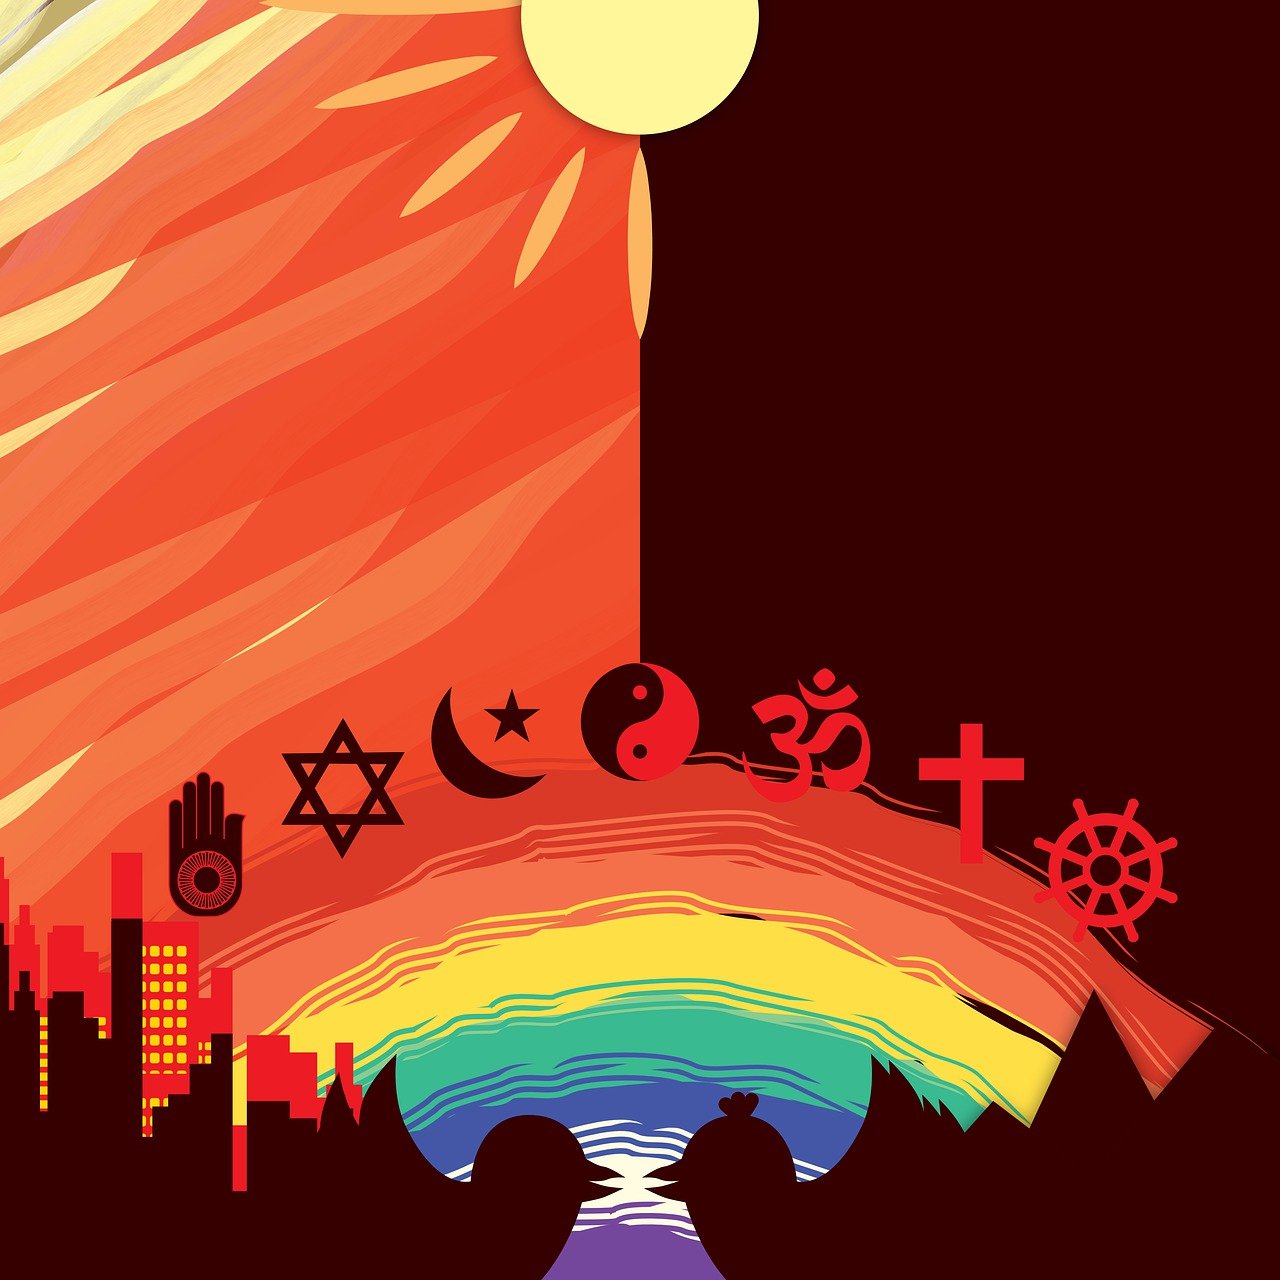 a man with a rainbow hat standing in front of a city, an illustration of, symbolism, all religions combined, sunset illustration, on a red background, poster illustration